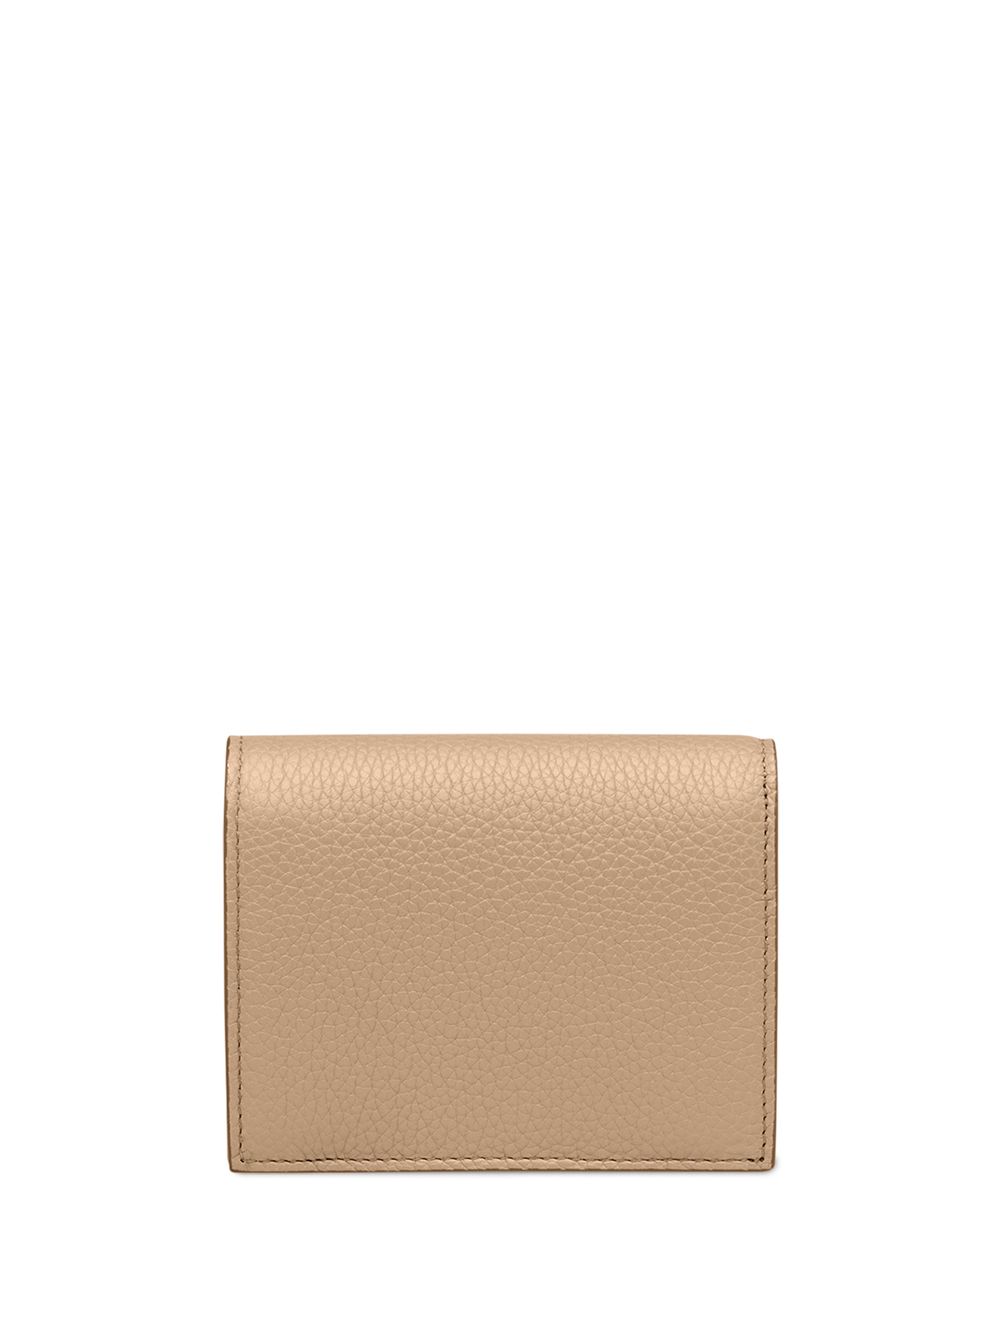 Shop Prada small leather wallet with Express Delivery - FARFETCH